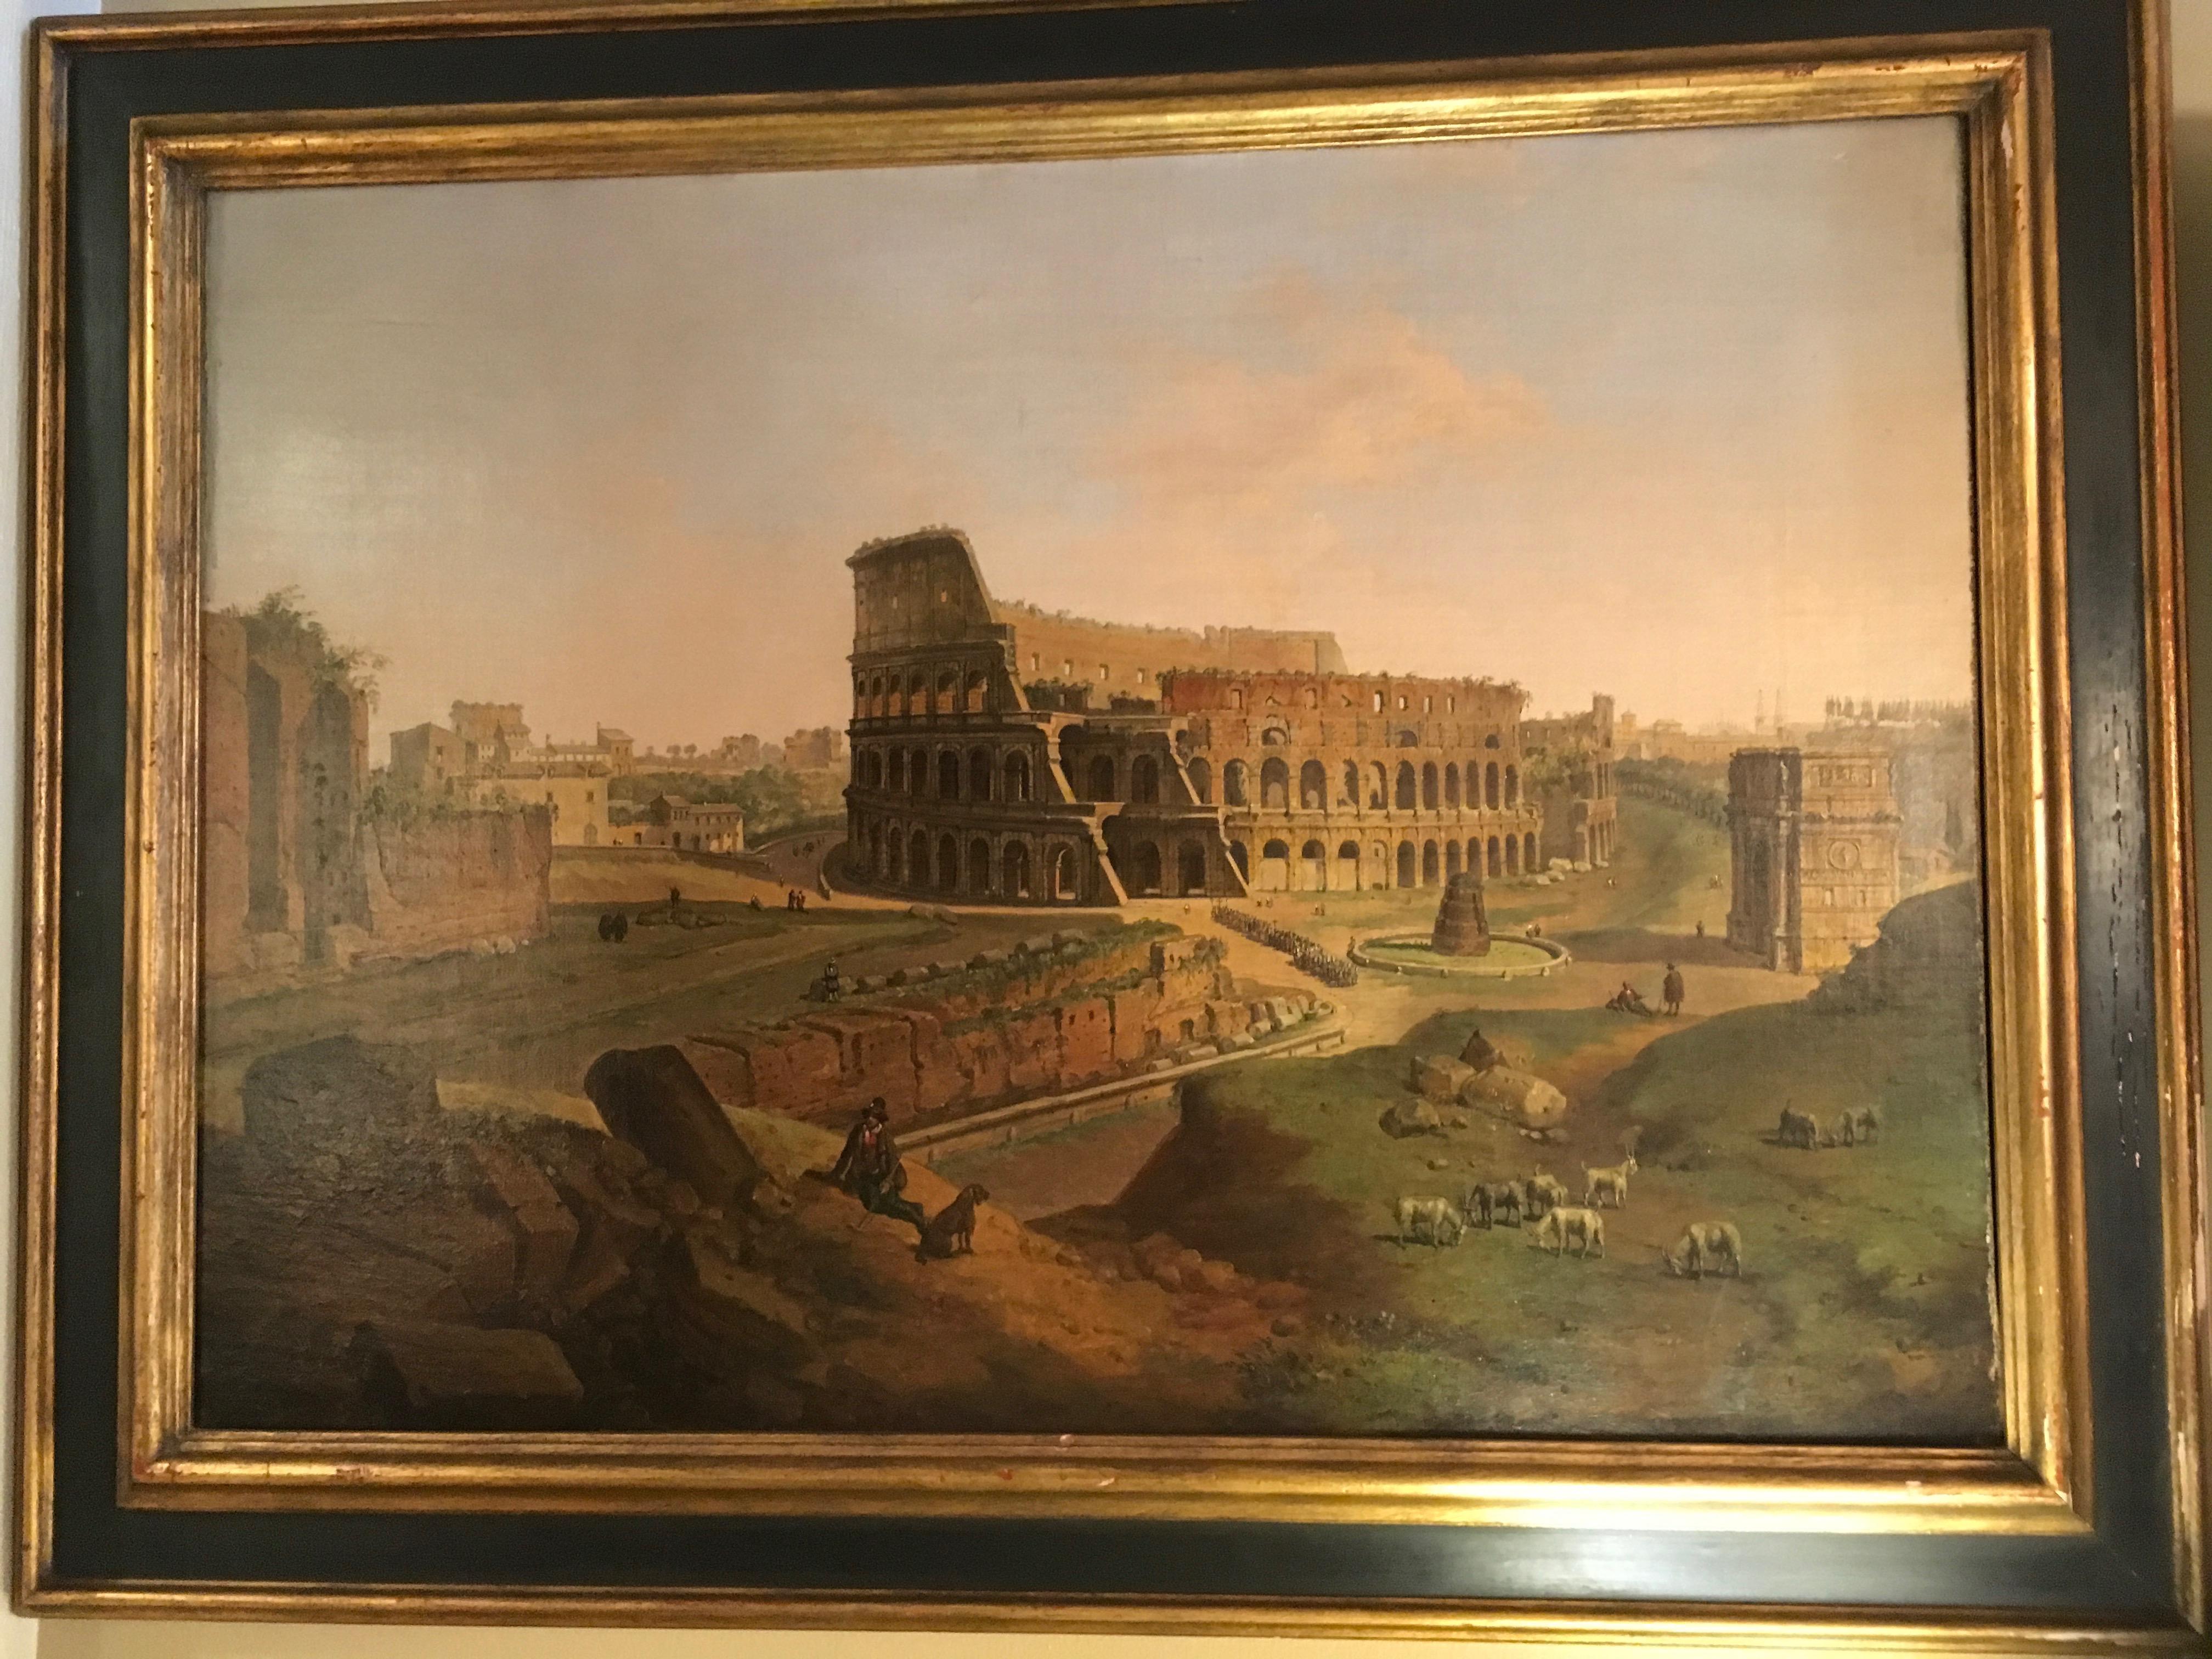 The Colosseum in Rome - Painting by Jean Victor Louis Faure